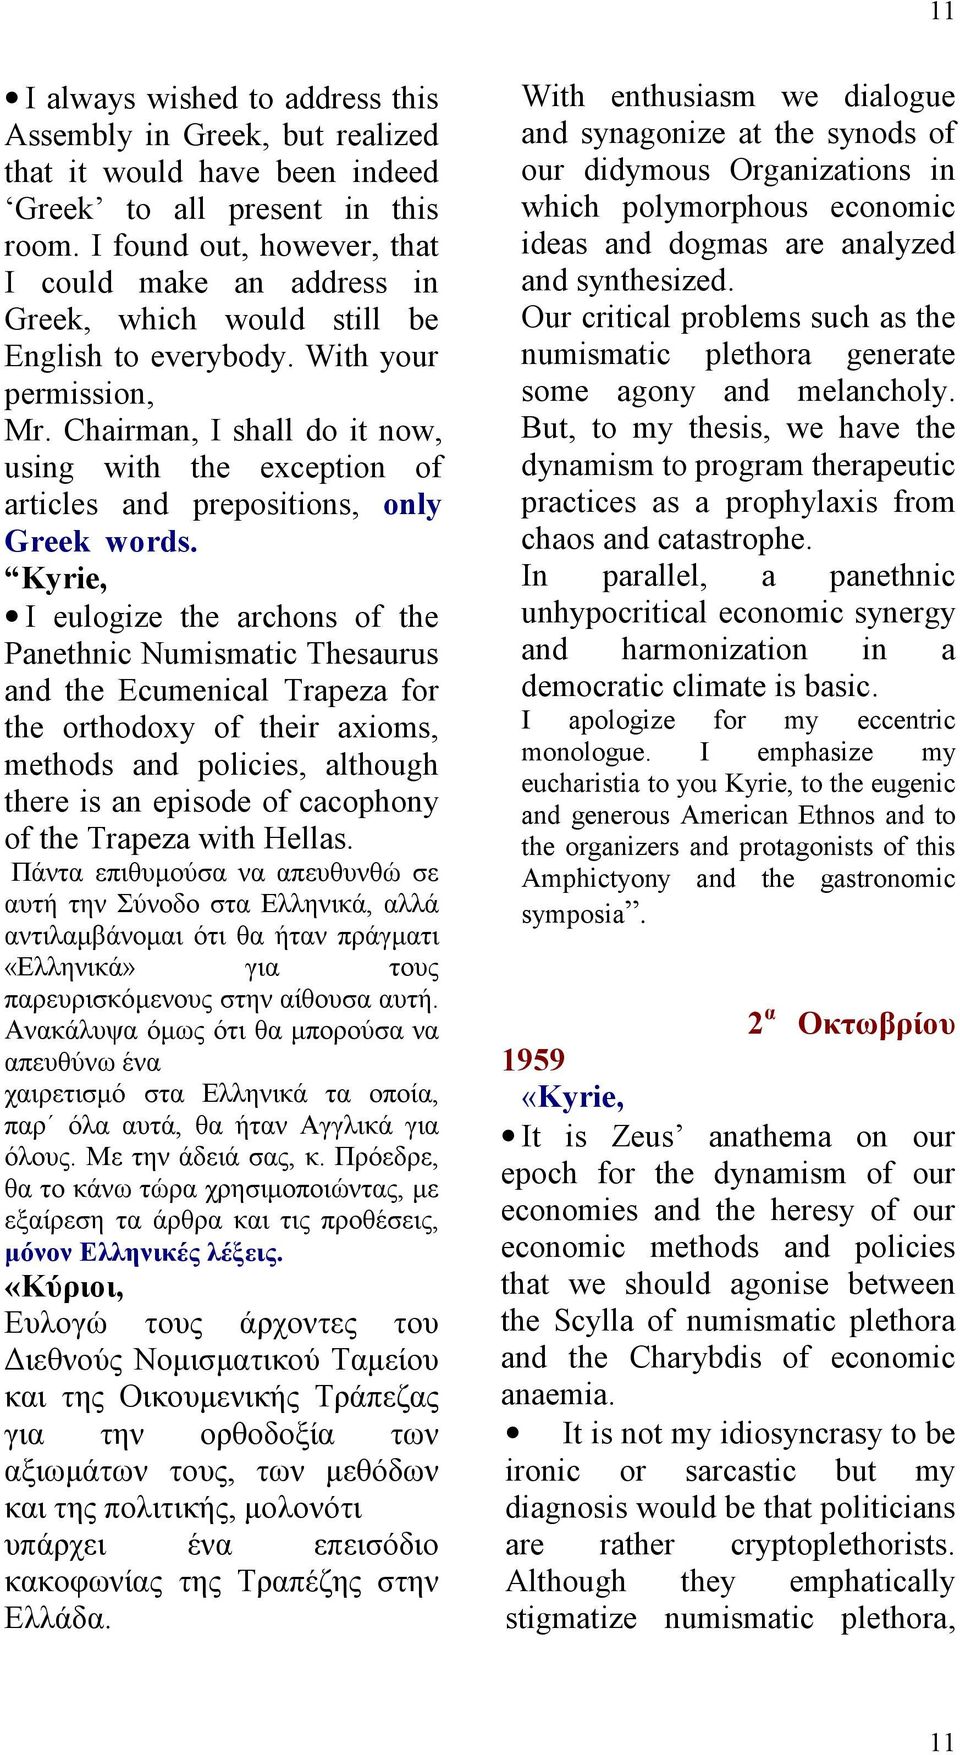 Chairman, I shall do it now, using with the exception of articles and prepositions, only Greek words.